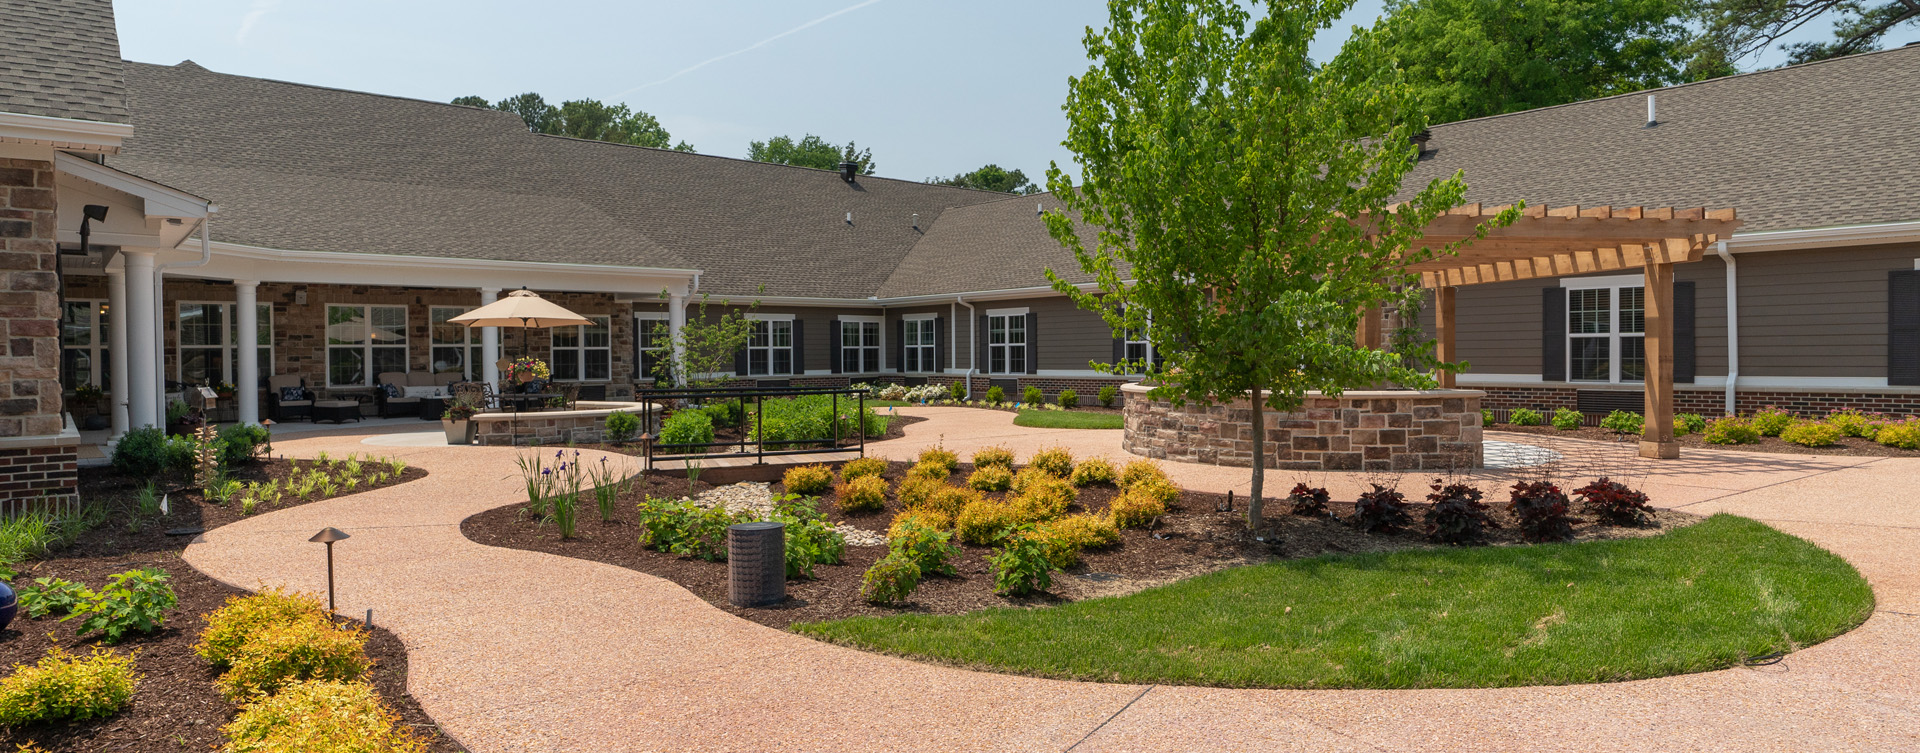 Enjoy the outdoors in a whole new light by stepping into our secure courtyard at Bickford of Chesapeake